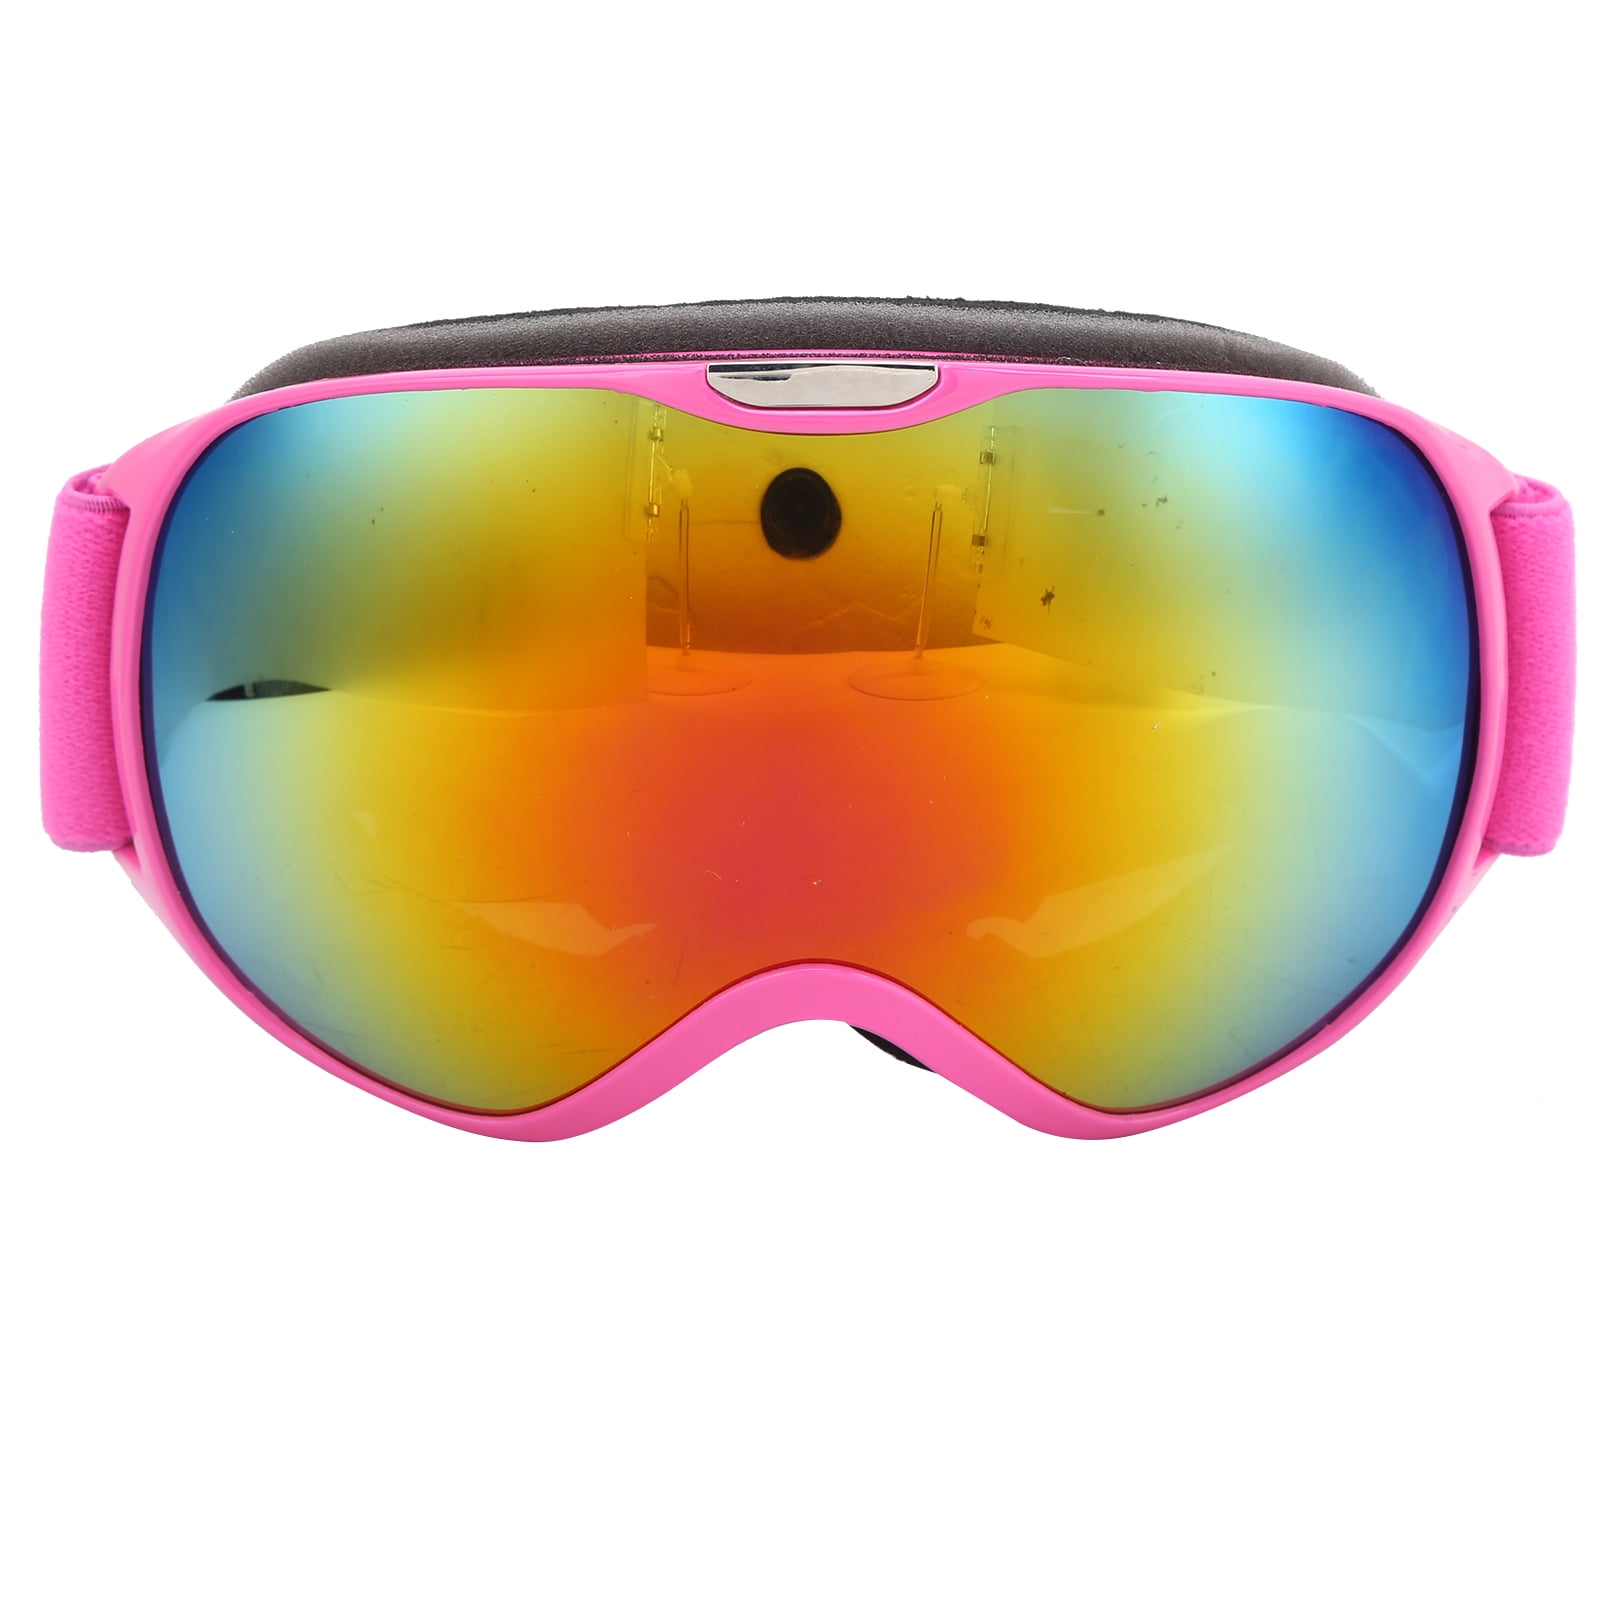 Details about   Children Skiing Glasses Anti Fog Windproof Bright Snowboard Goggles with Box Bag 